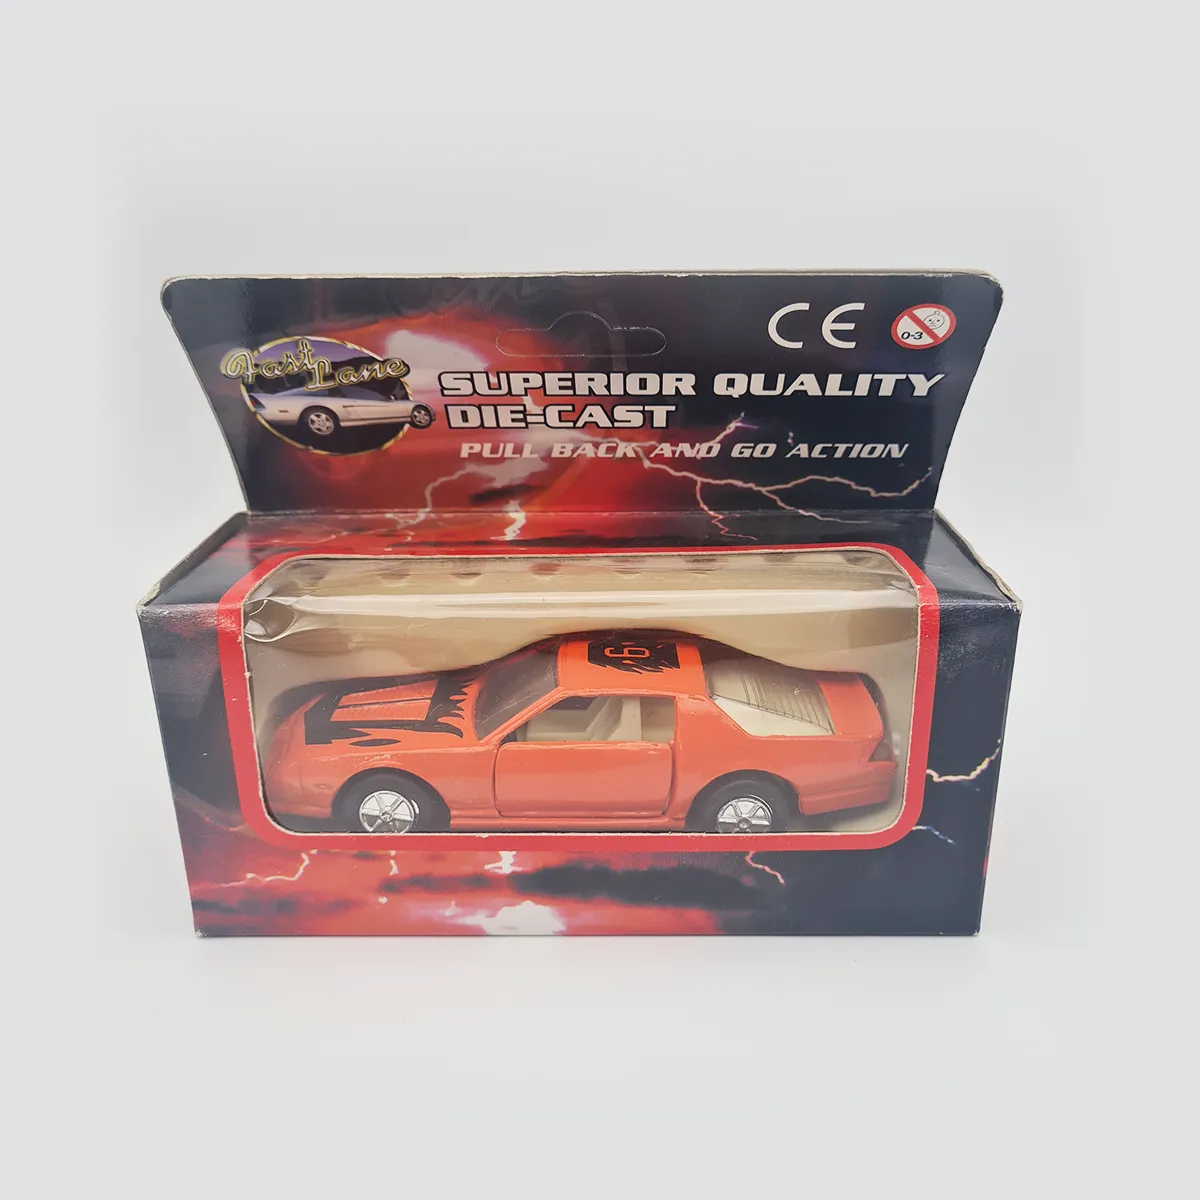 Die-Cast Superior Quality Pull Back And Go Action Toy Cars 1